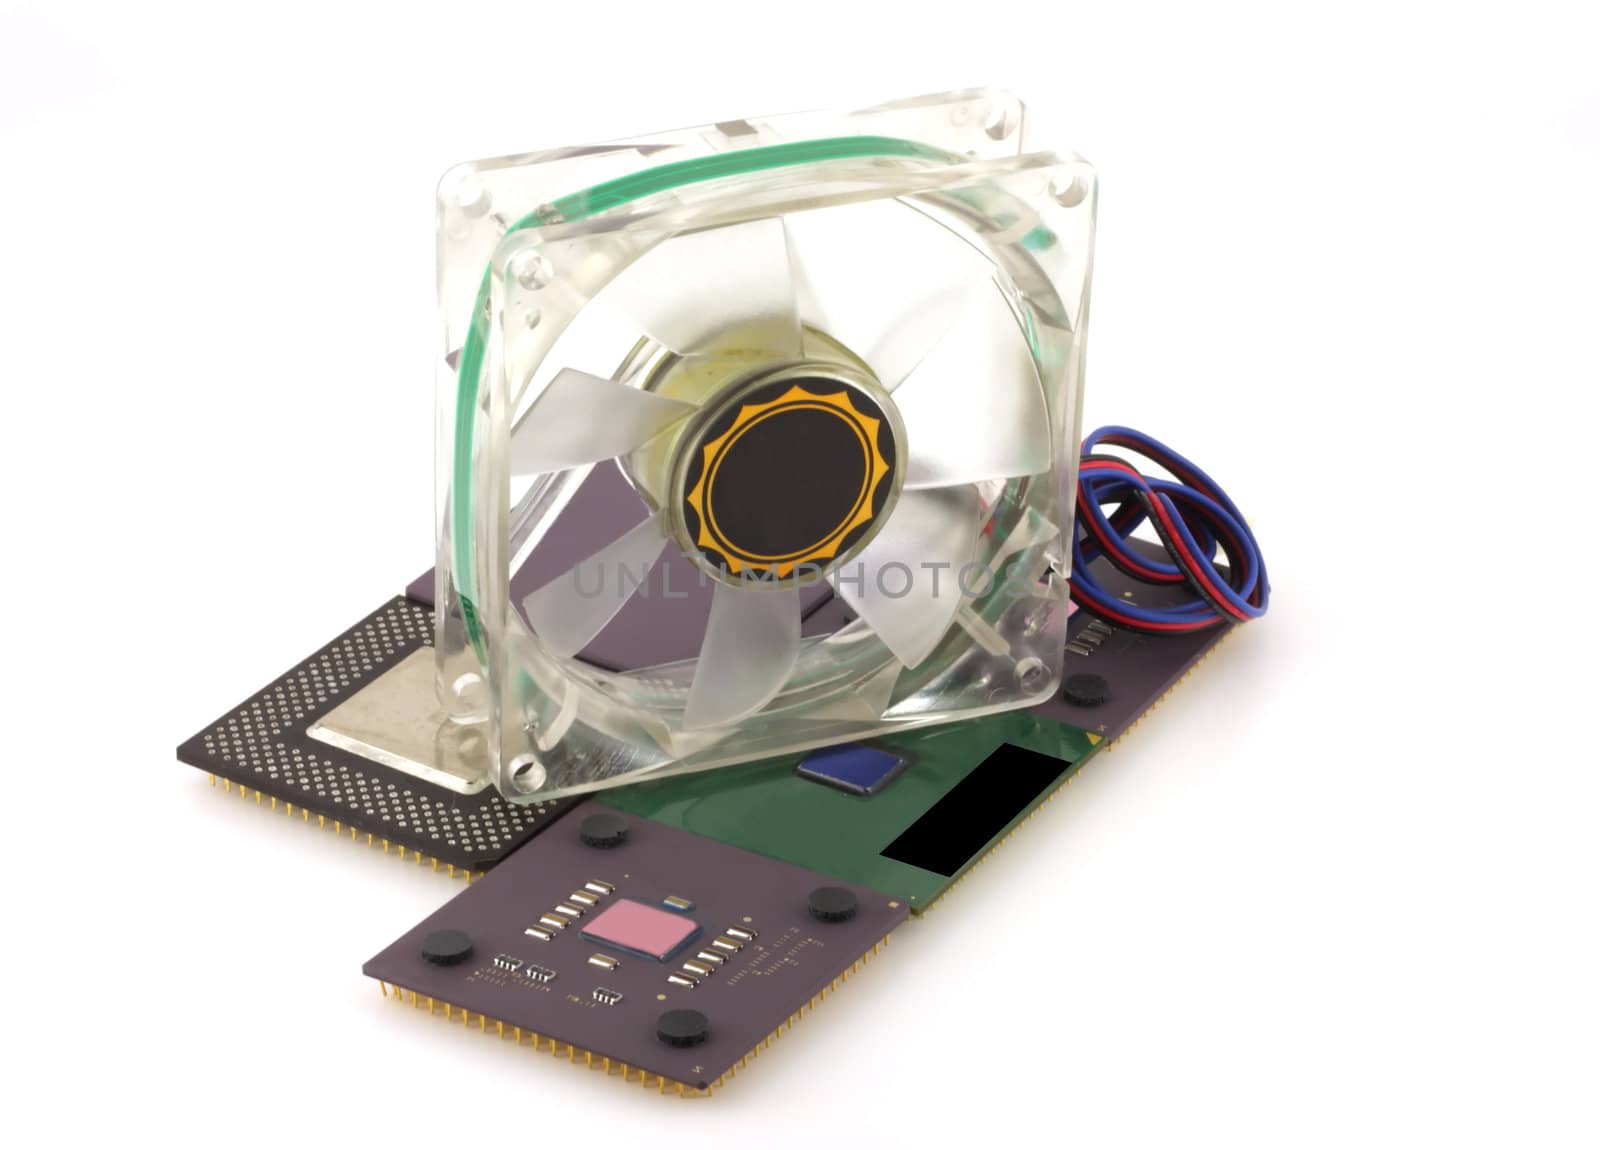 Fan and processors for computer by sergpet